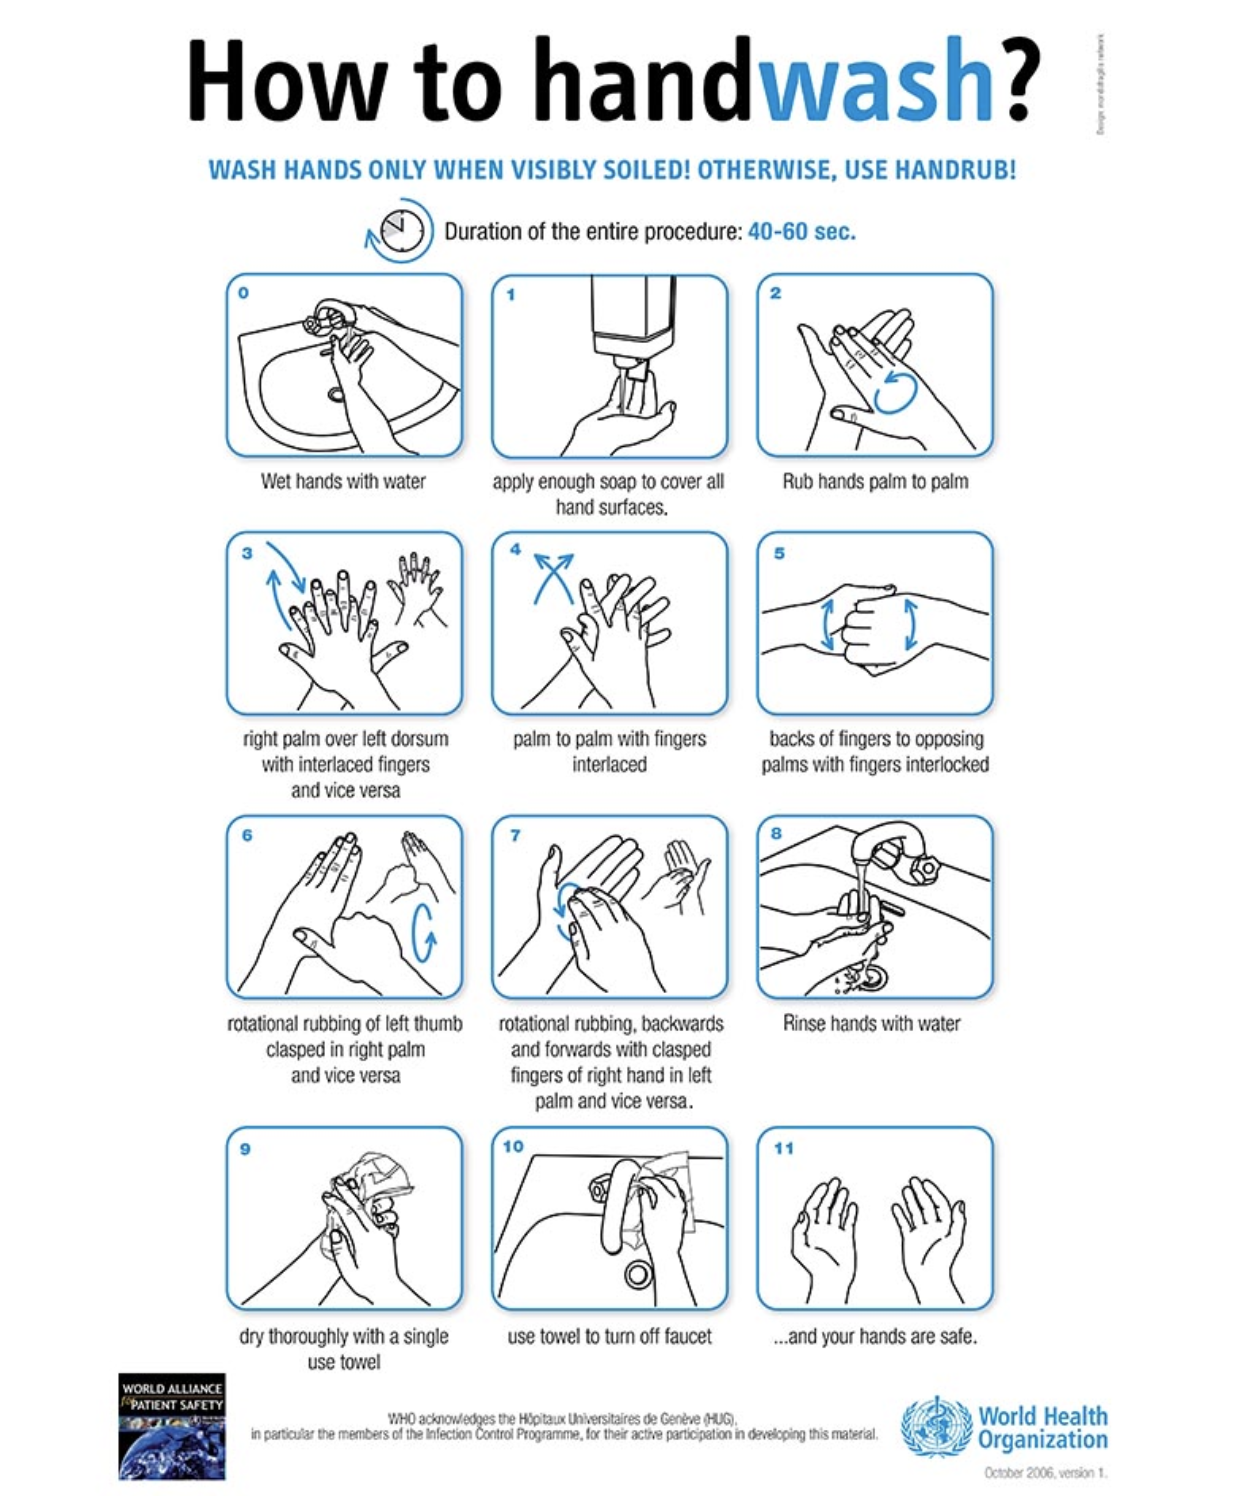 Coronavirus: Wash Your Hands Using This Technique From The WHO